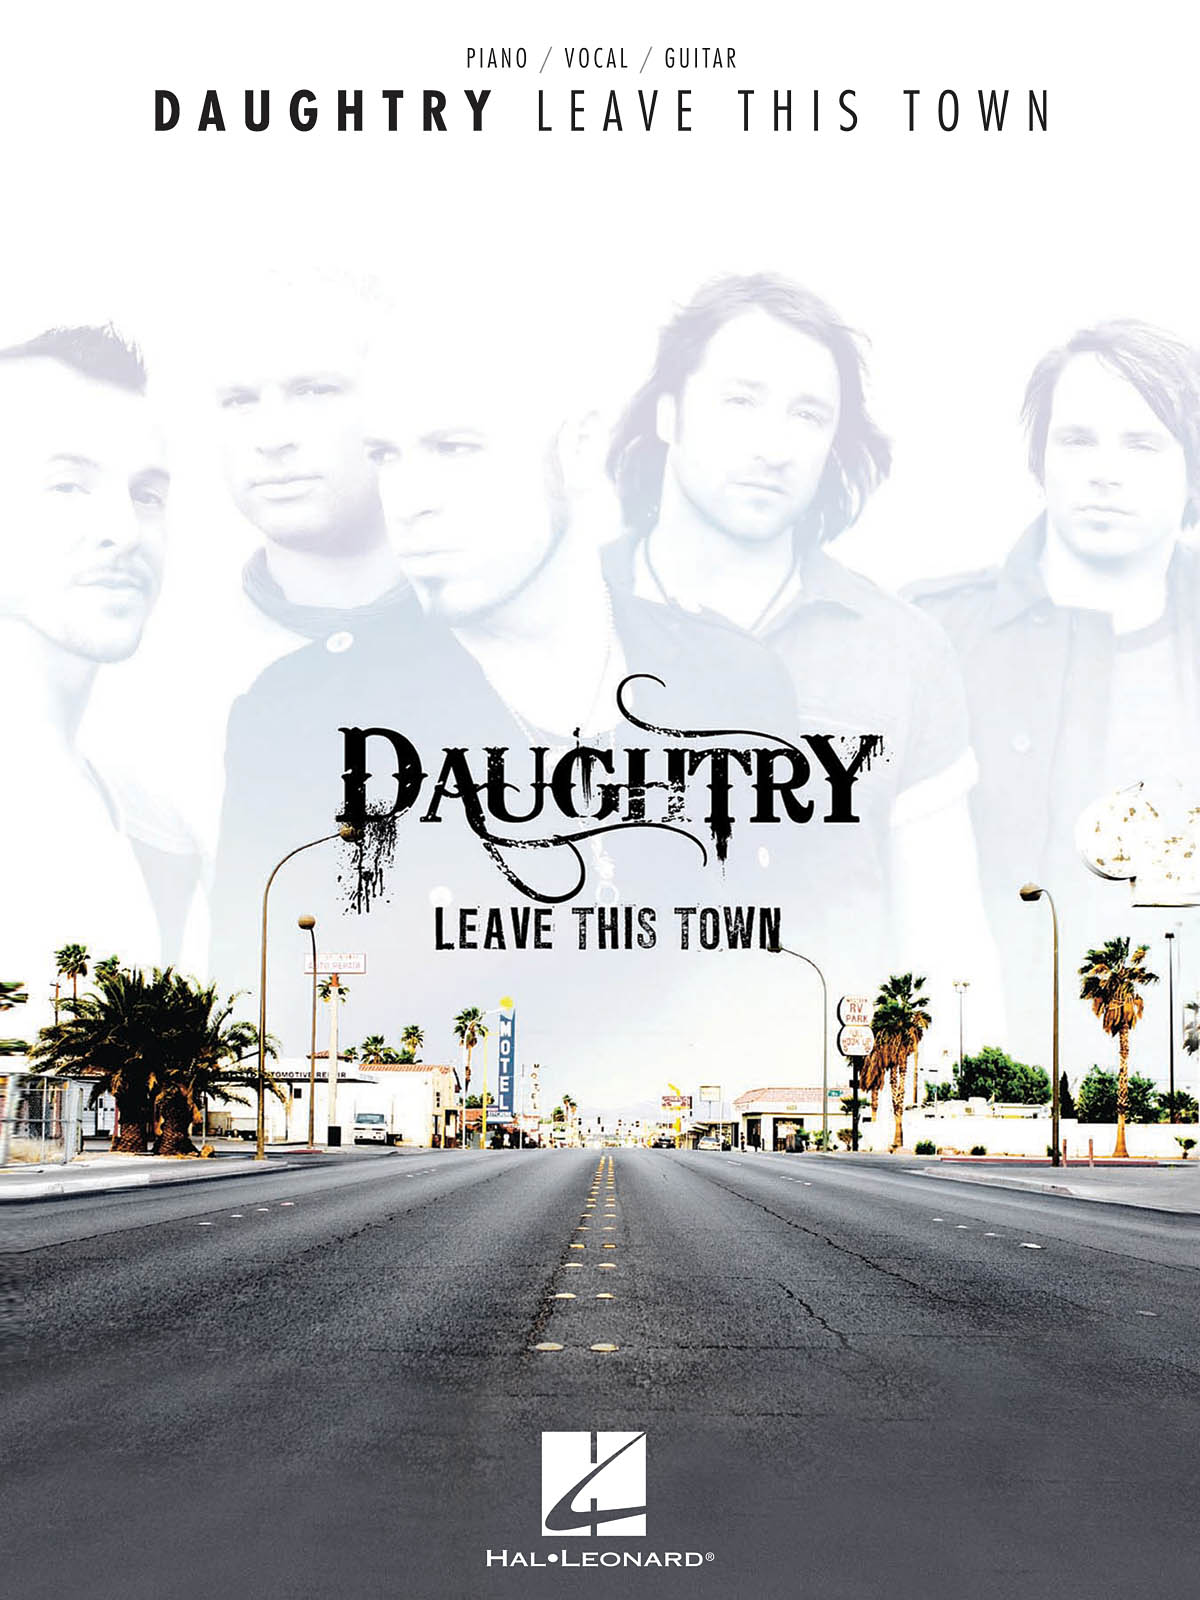 Daughtry: Daughtry leave this town: Piano  Vocal and Guitar: Album Songbook